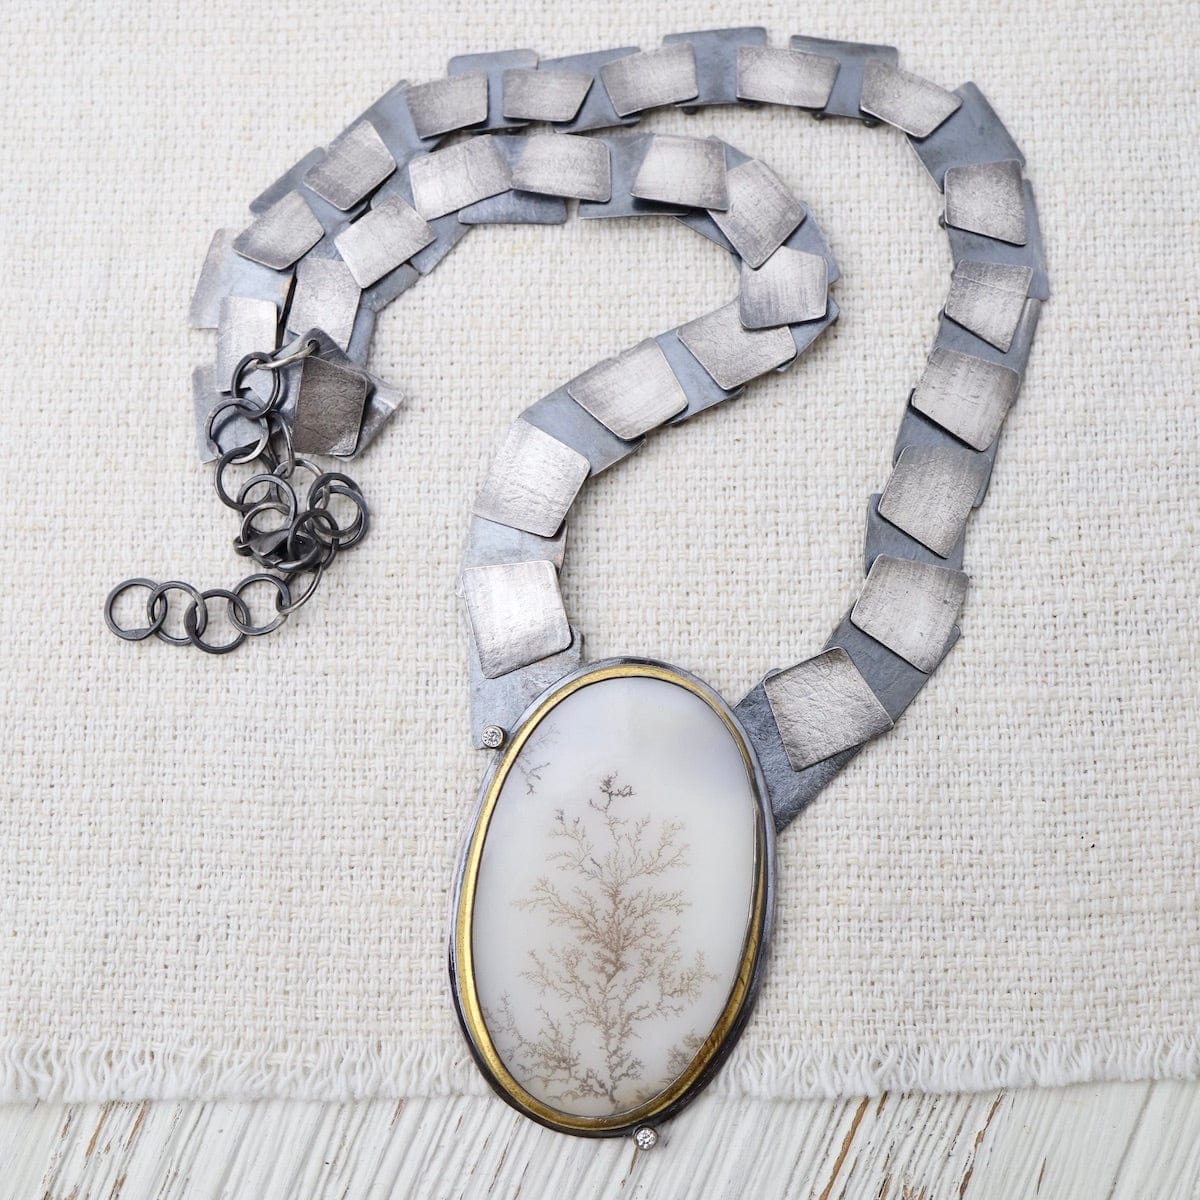 NKL One of a Kind Dendrite Queen Necklace